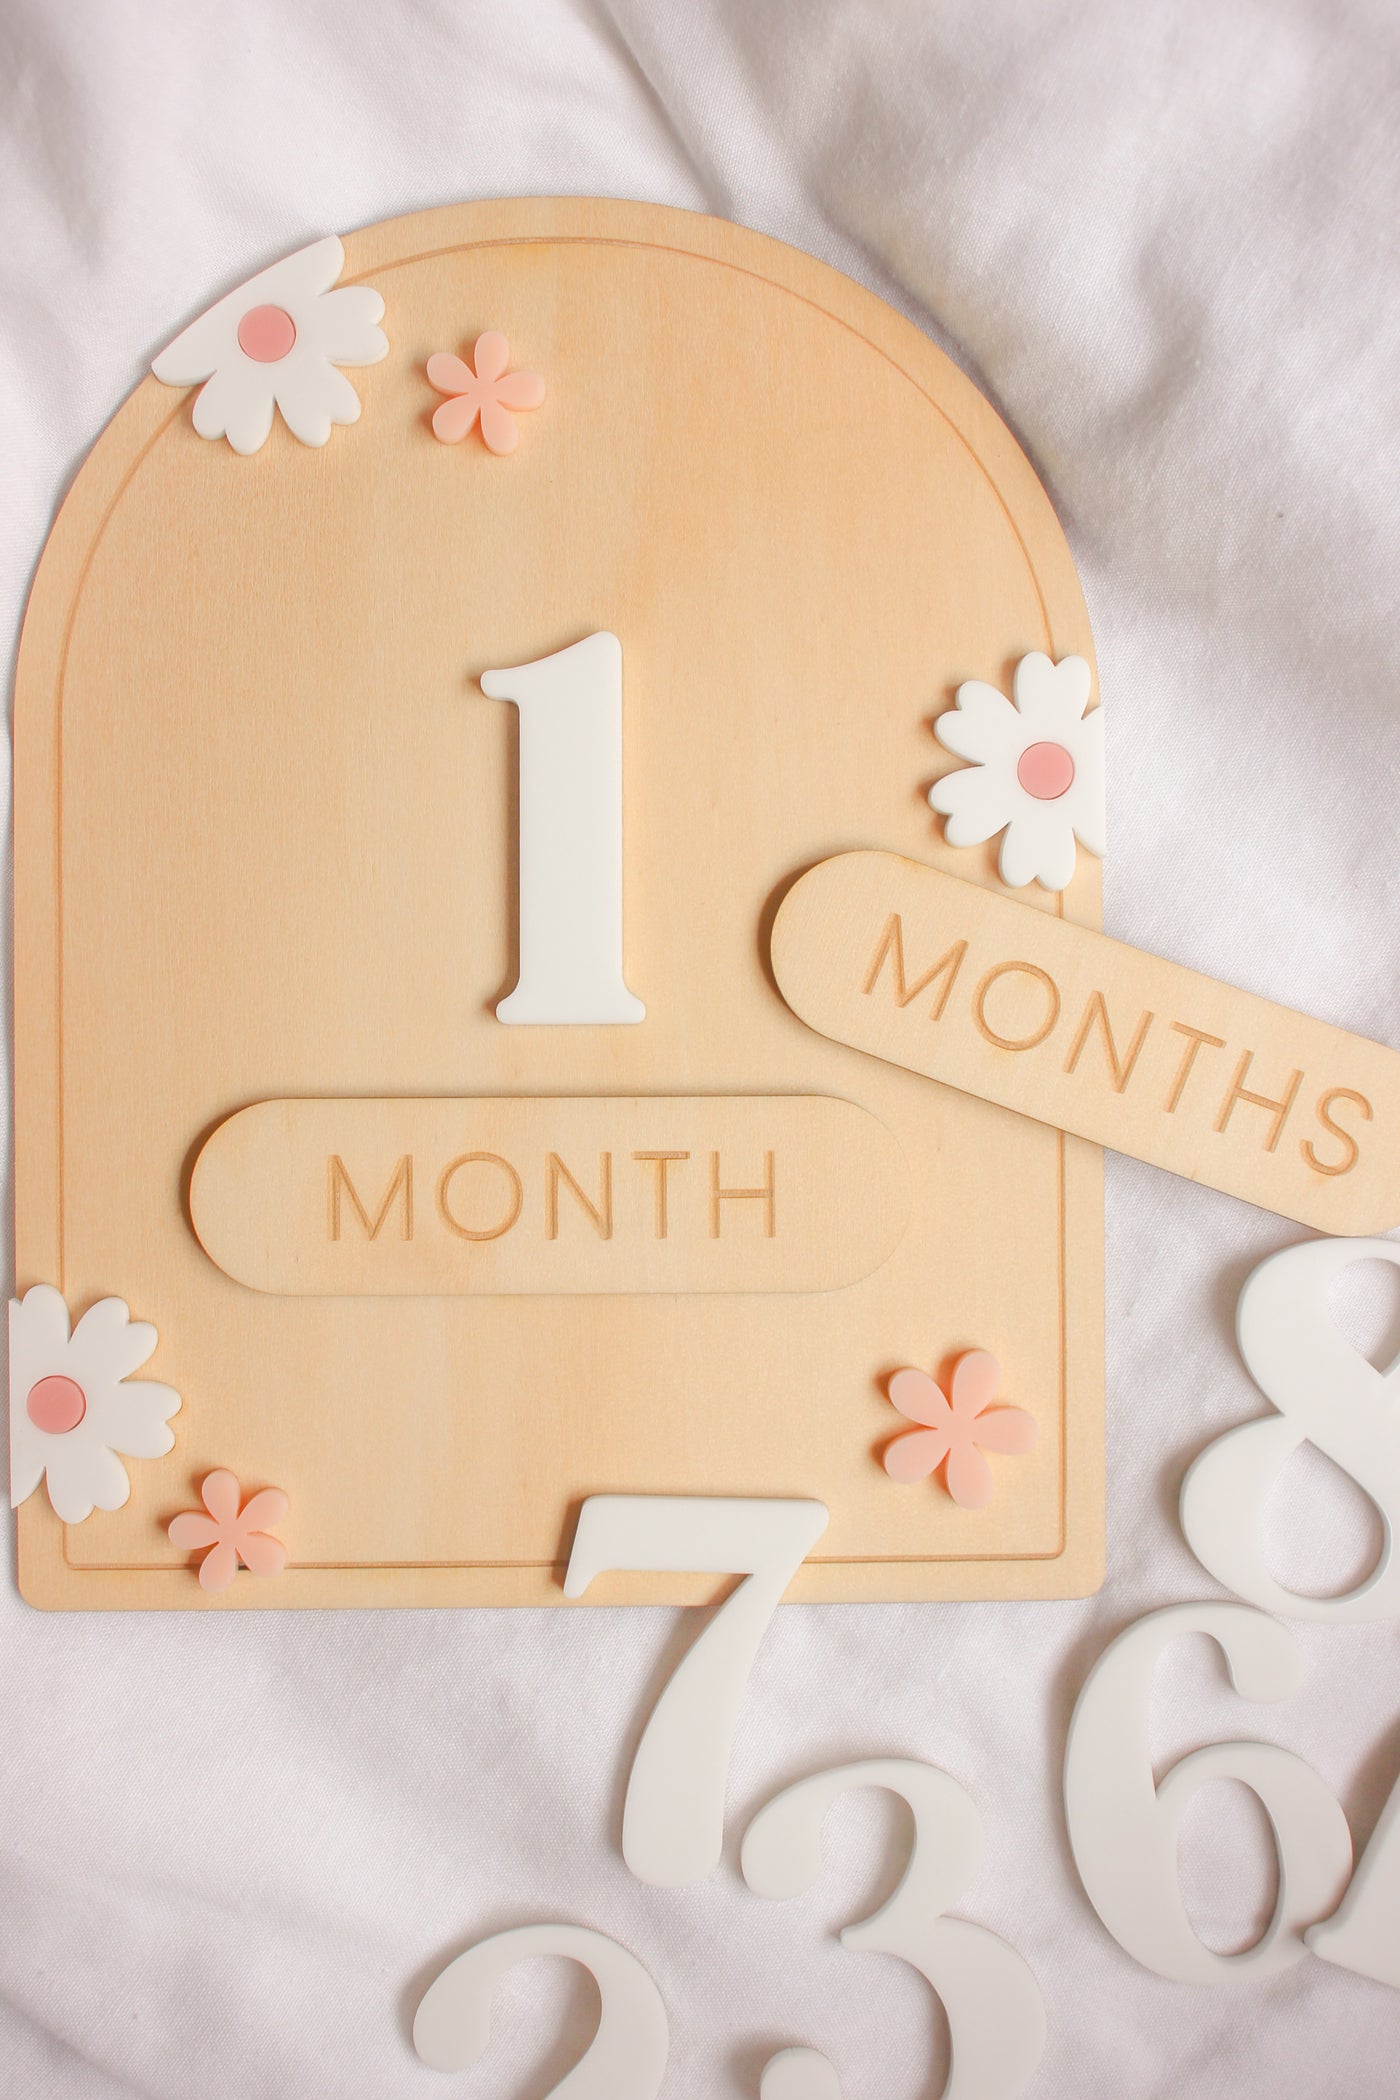 My first year | Interchangeable monthly milestone plaque